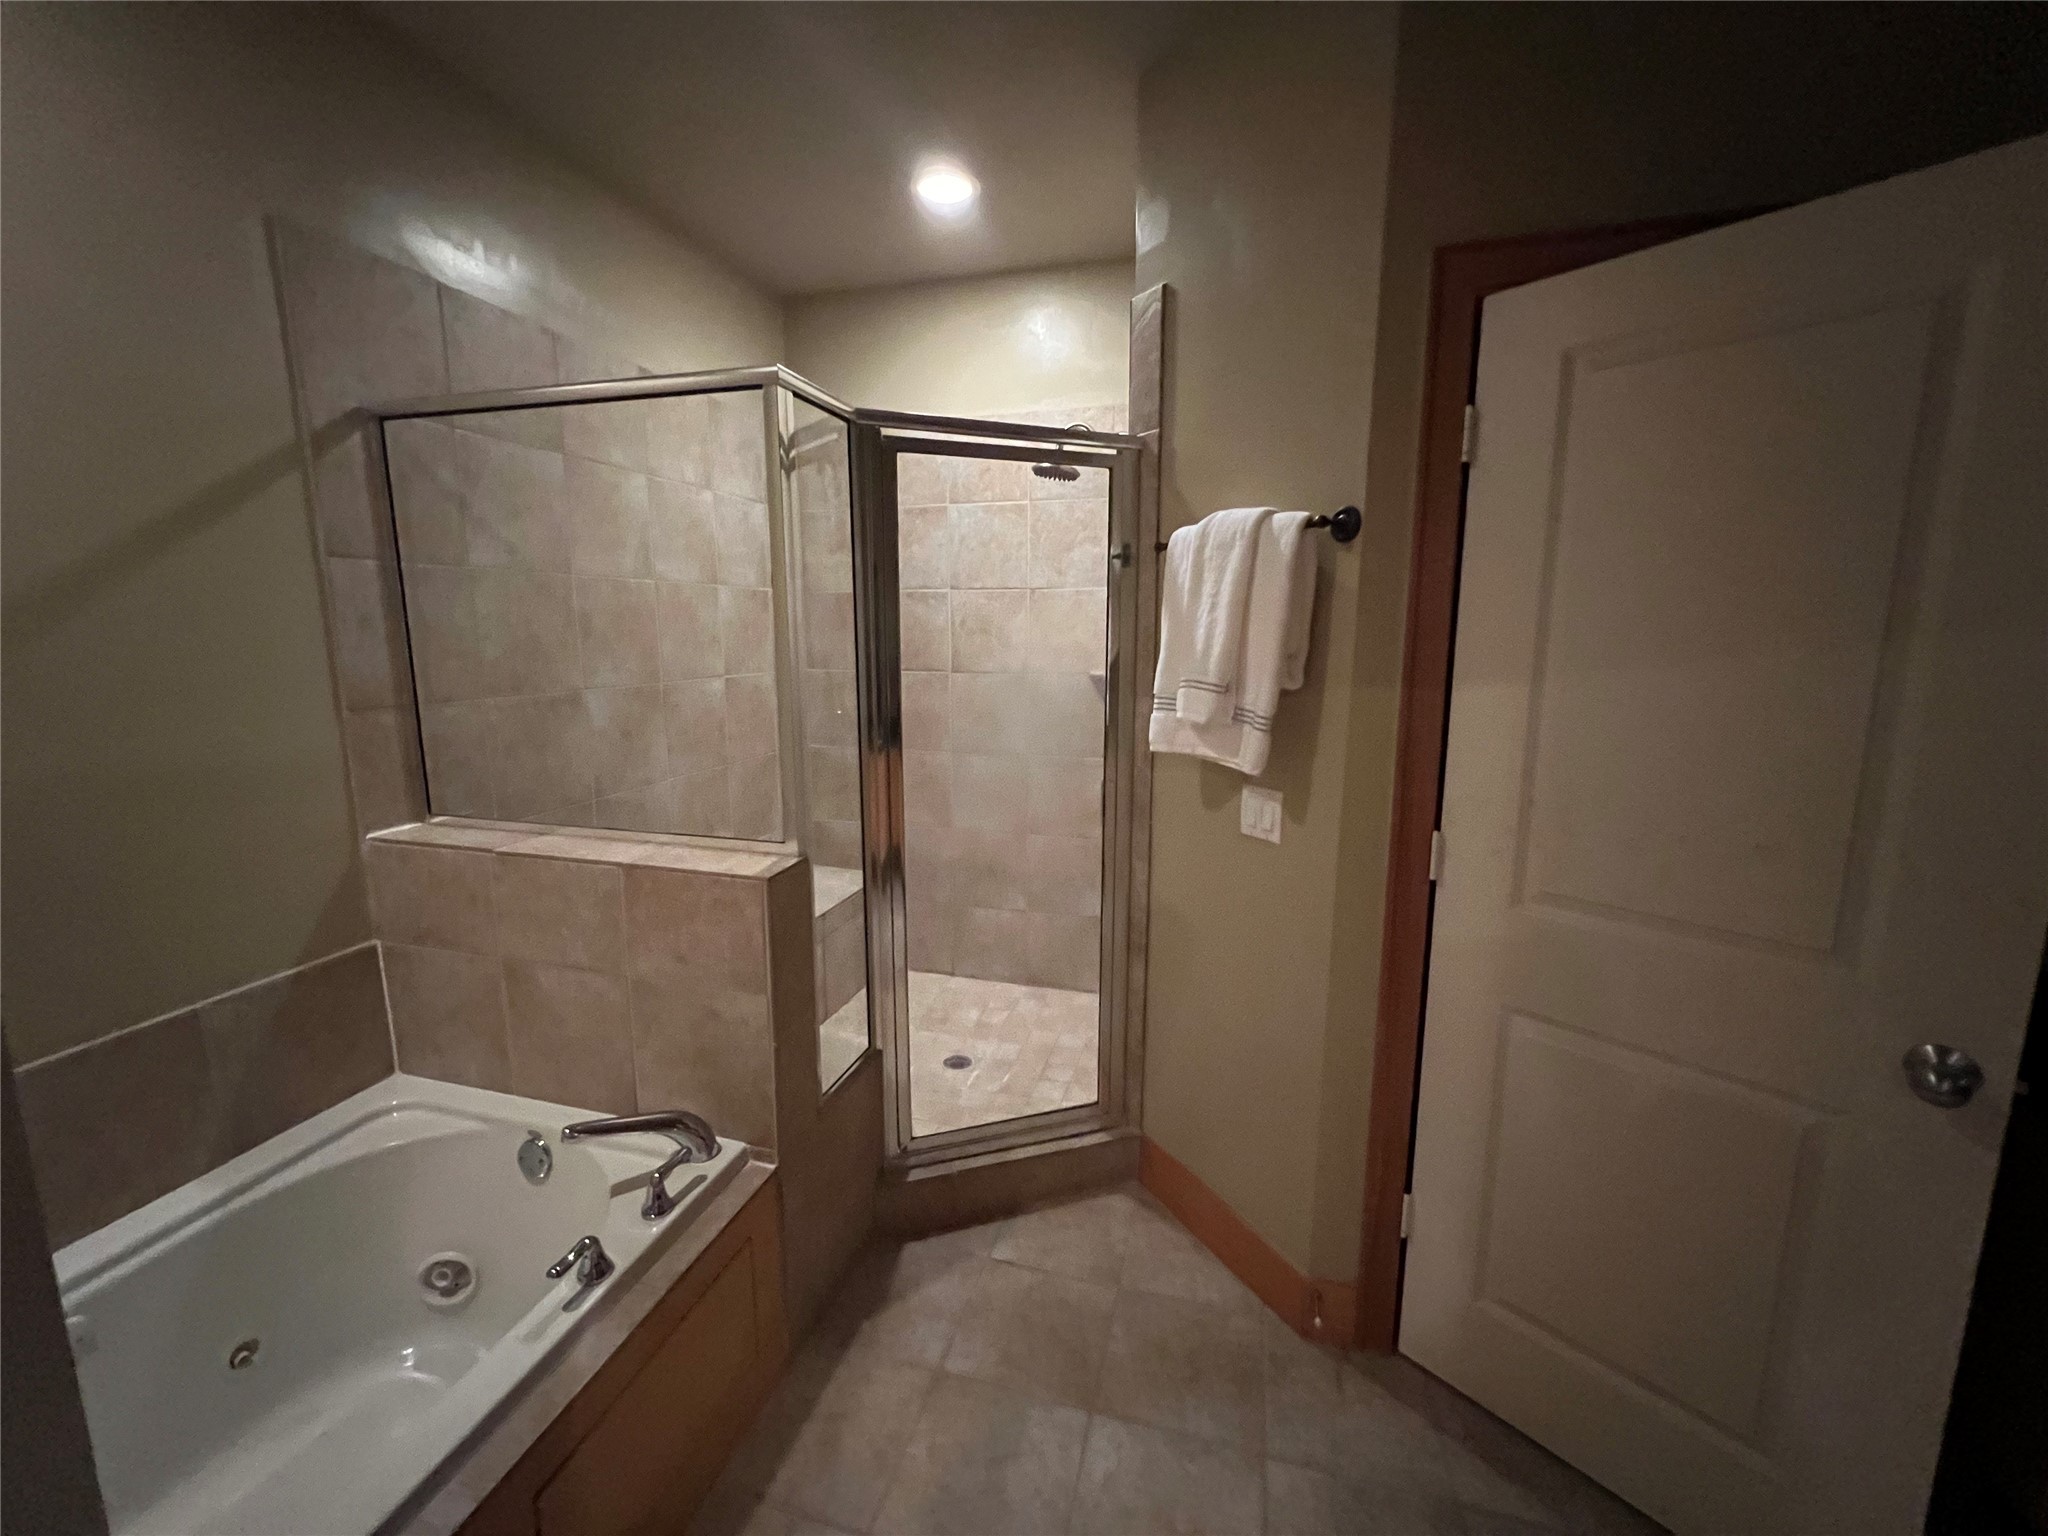 Primary bathroom with tile flooring, granite counters and Jacuzzi tub.